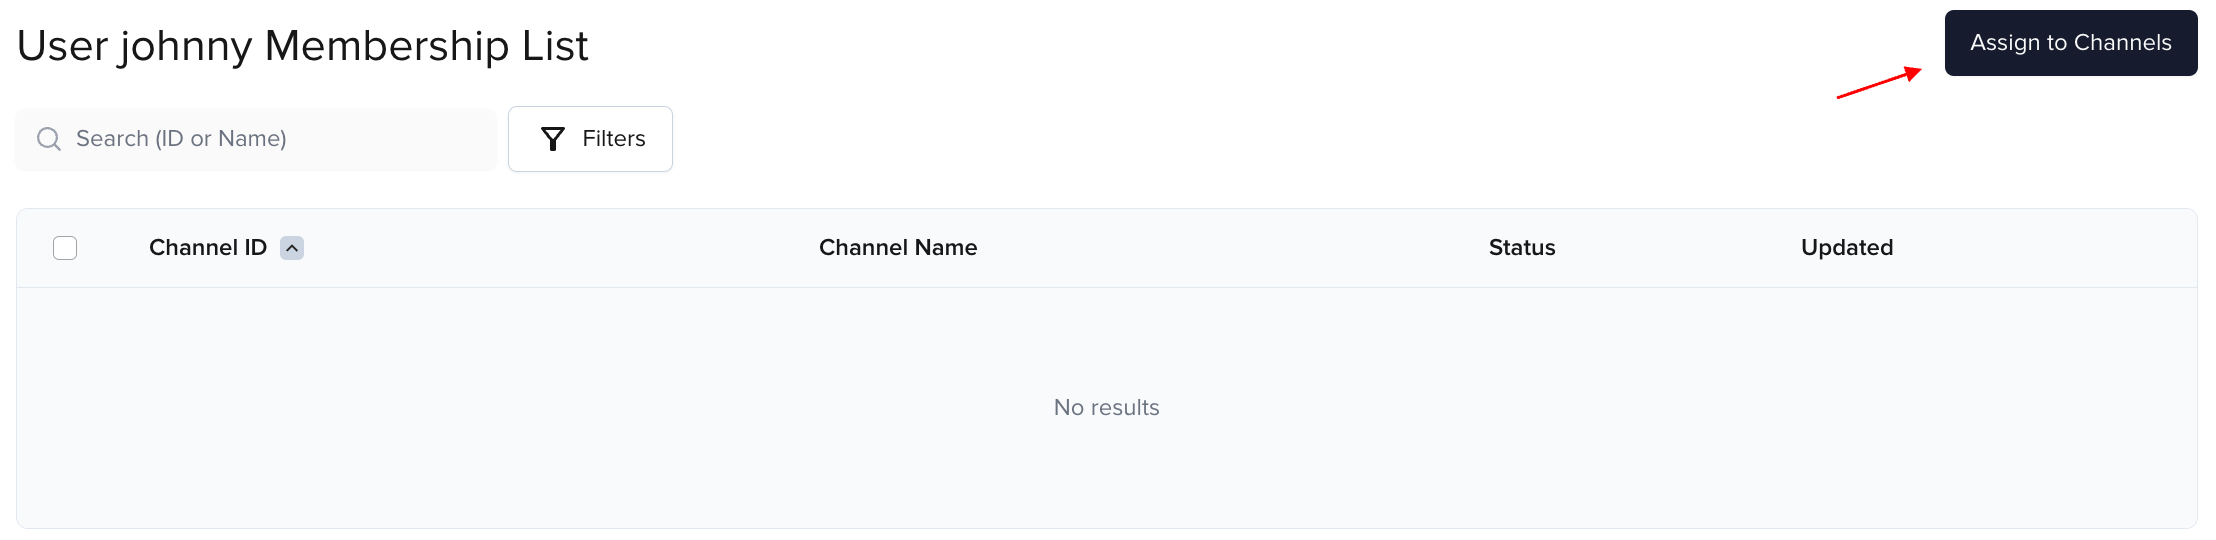 Assign to channels